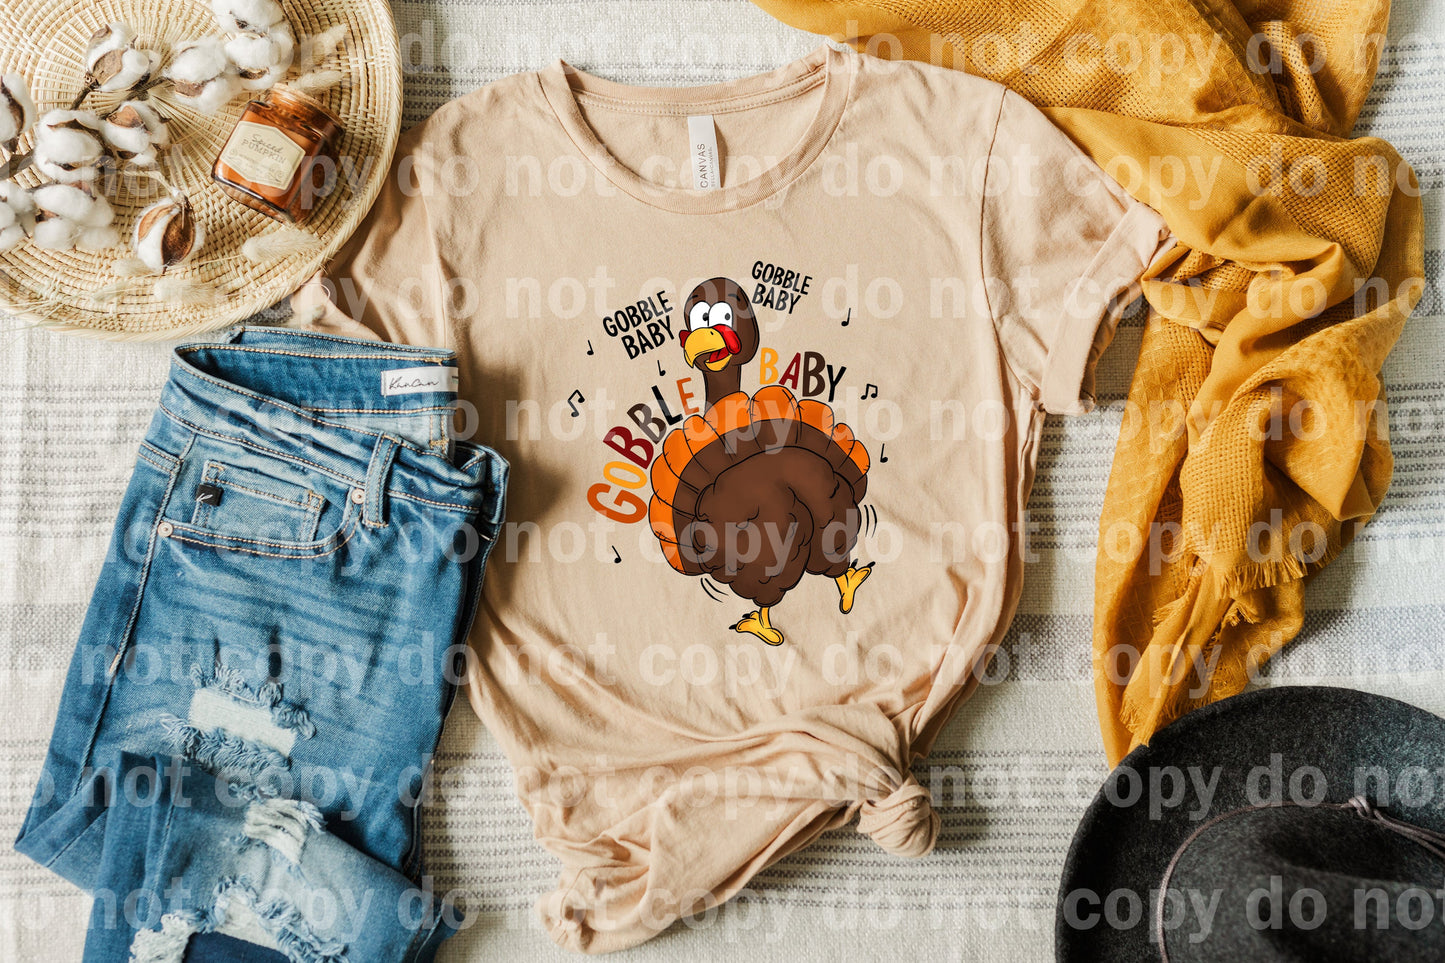 Gobble Baby Dream Print or Sublimation Print